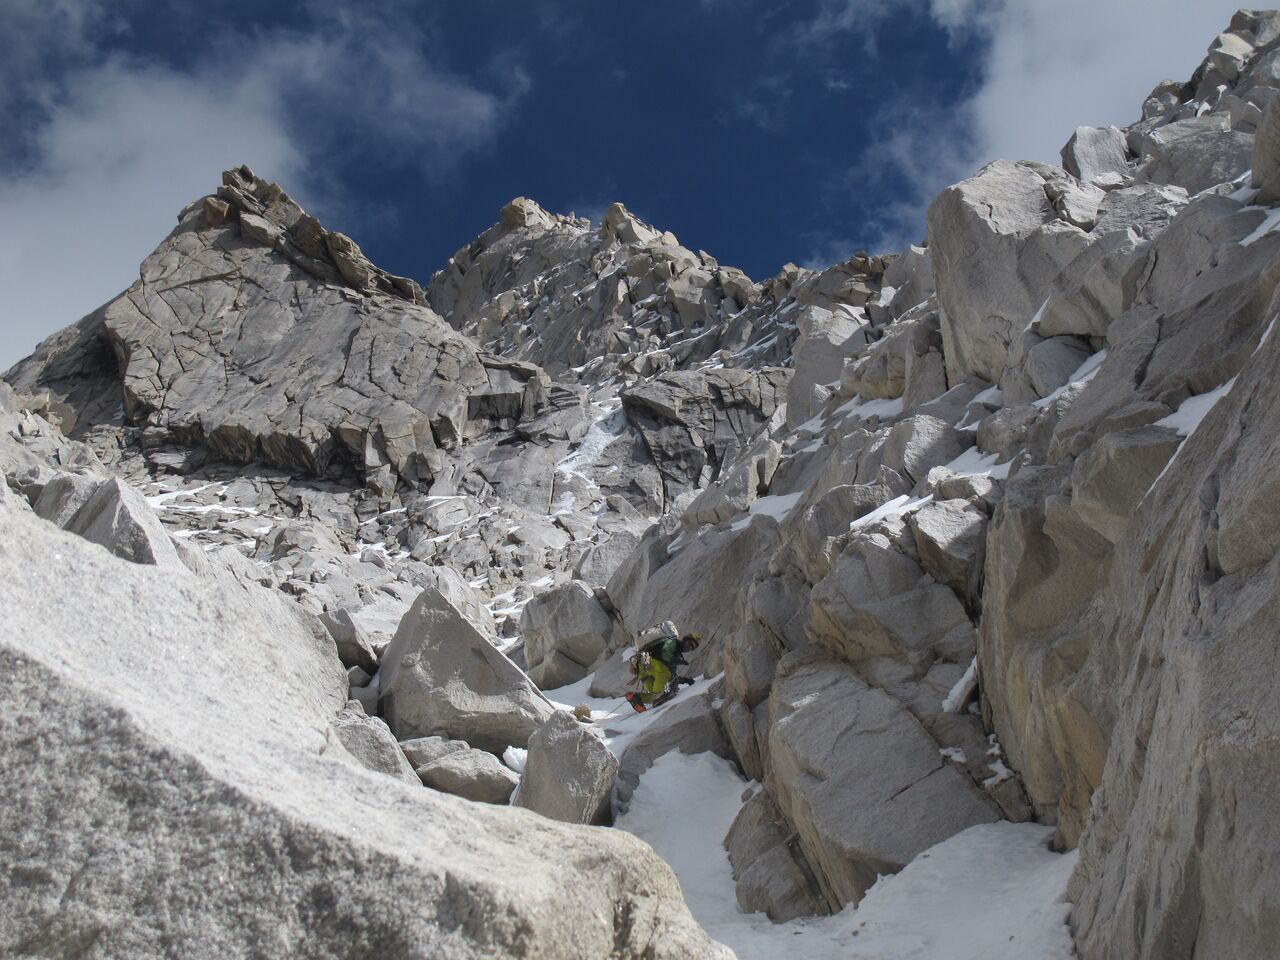 Ed Hannam leads below the traverse to the upper pitches at around 5350 meters. [Photo] Rob Baker.